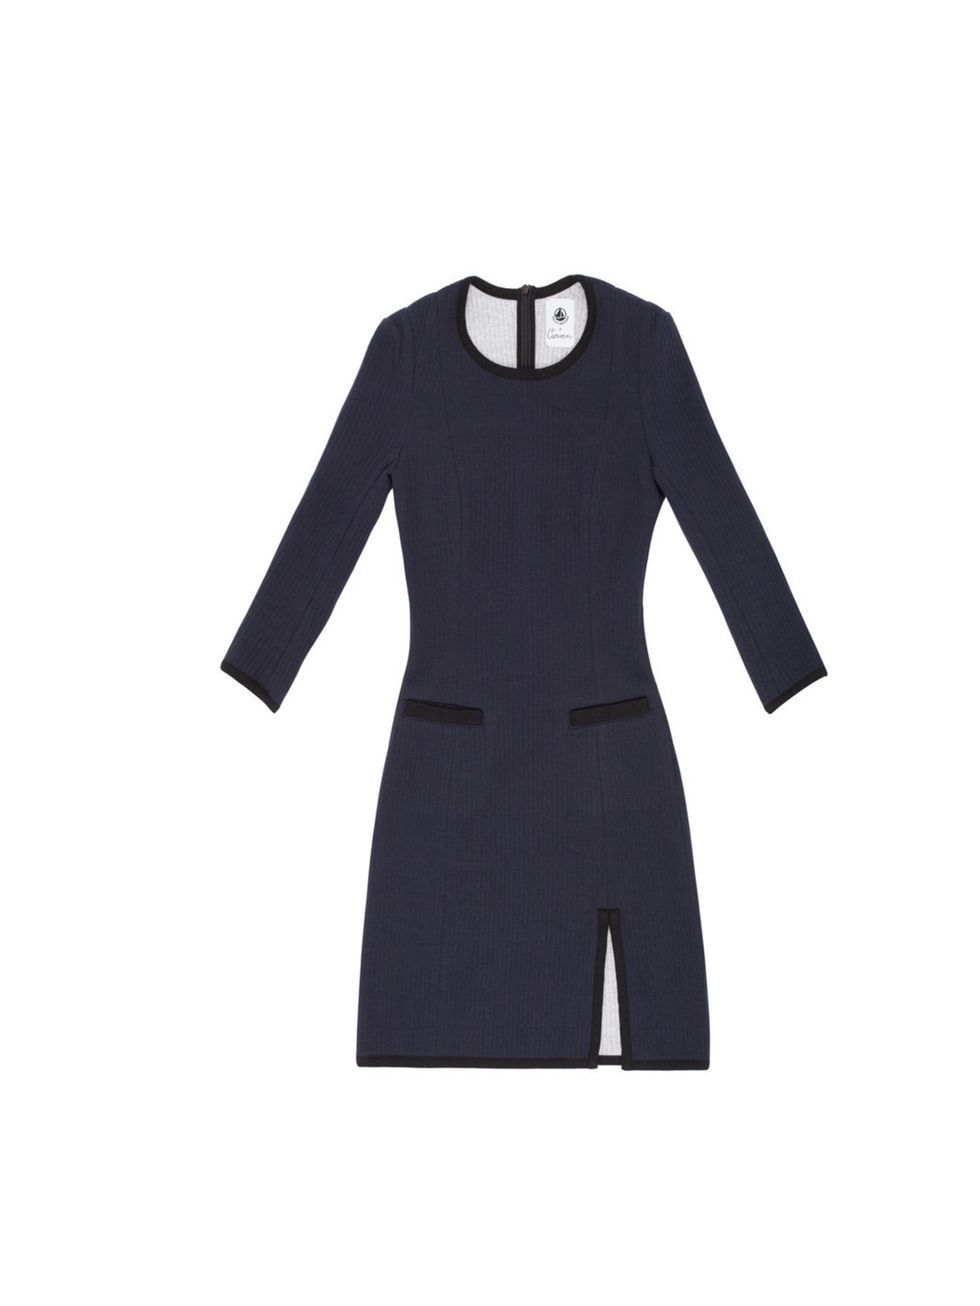 <p>Carven x Petit Bateau Robe Smoking, £210.85 </p><p>Available from MONDAY November 5th at <a href="http://www.farfetch.com/">www.farfetch.com</a></p>